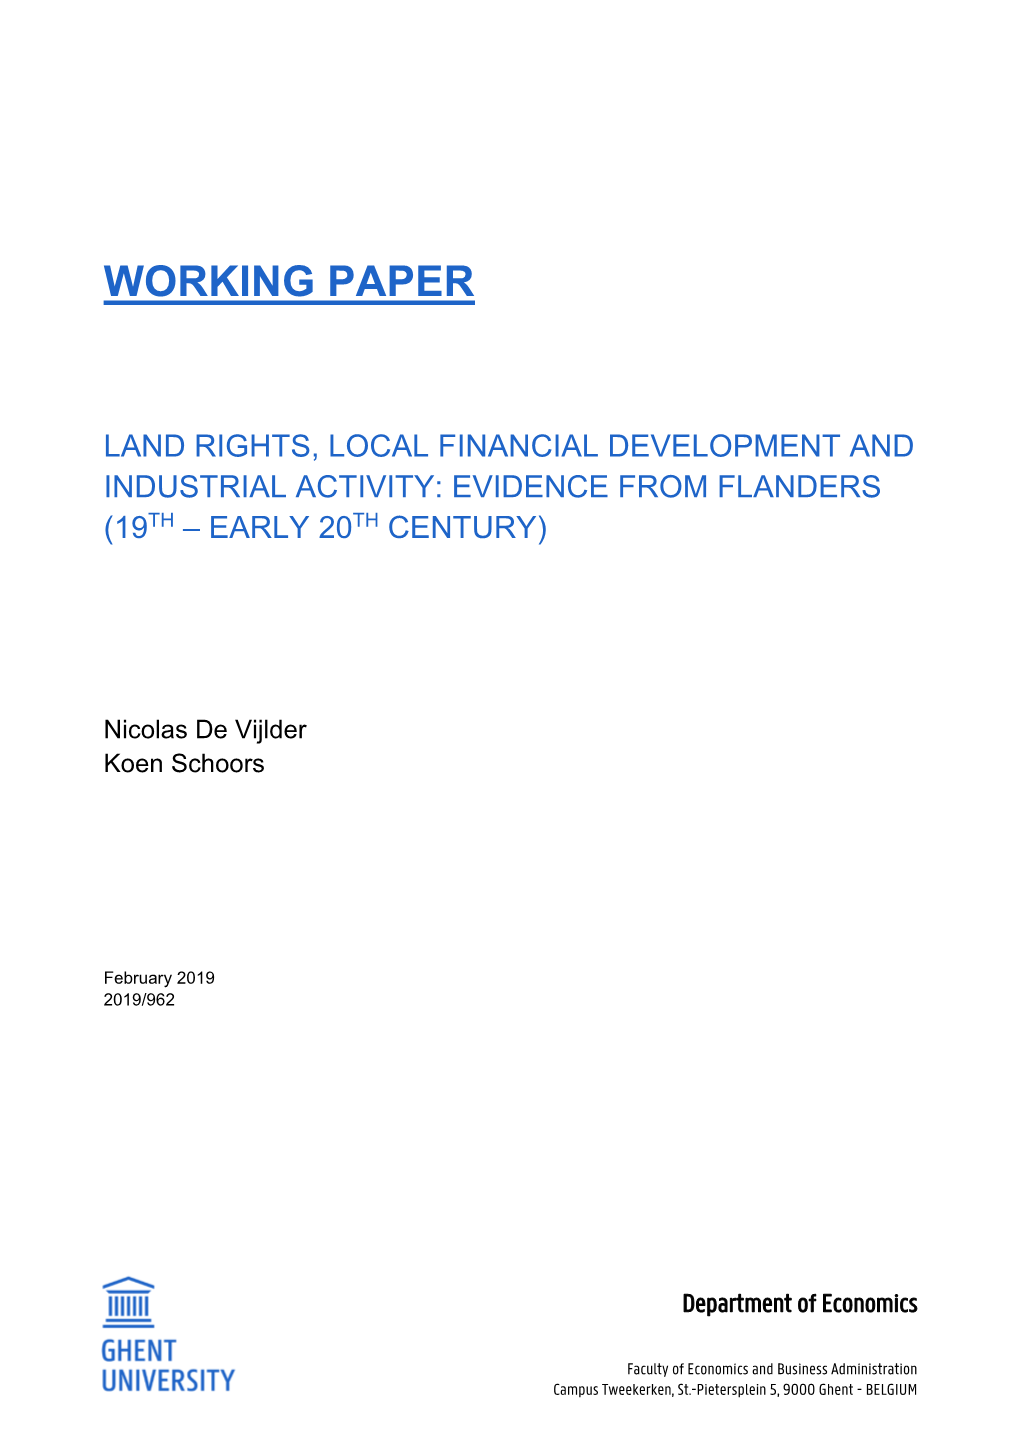 Land Rights, Local Financial Development and Industrial Activity: Evidence from Flanders (19Th – Early 20Th Century)